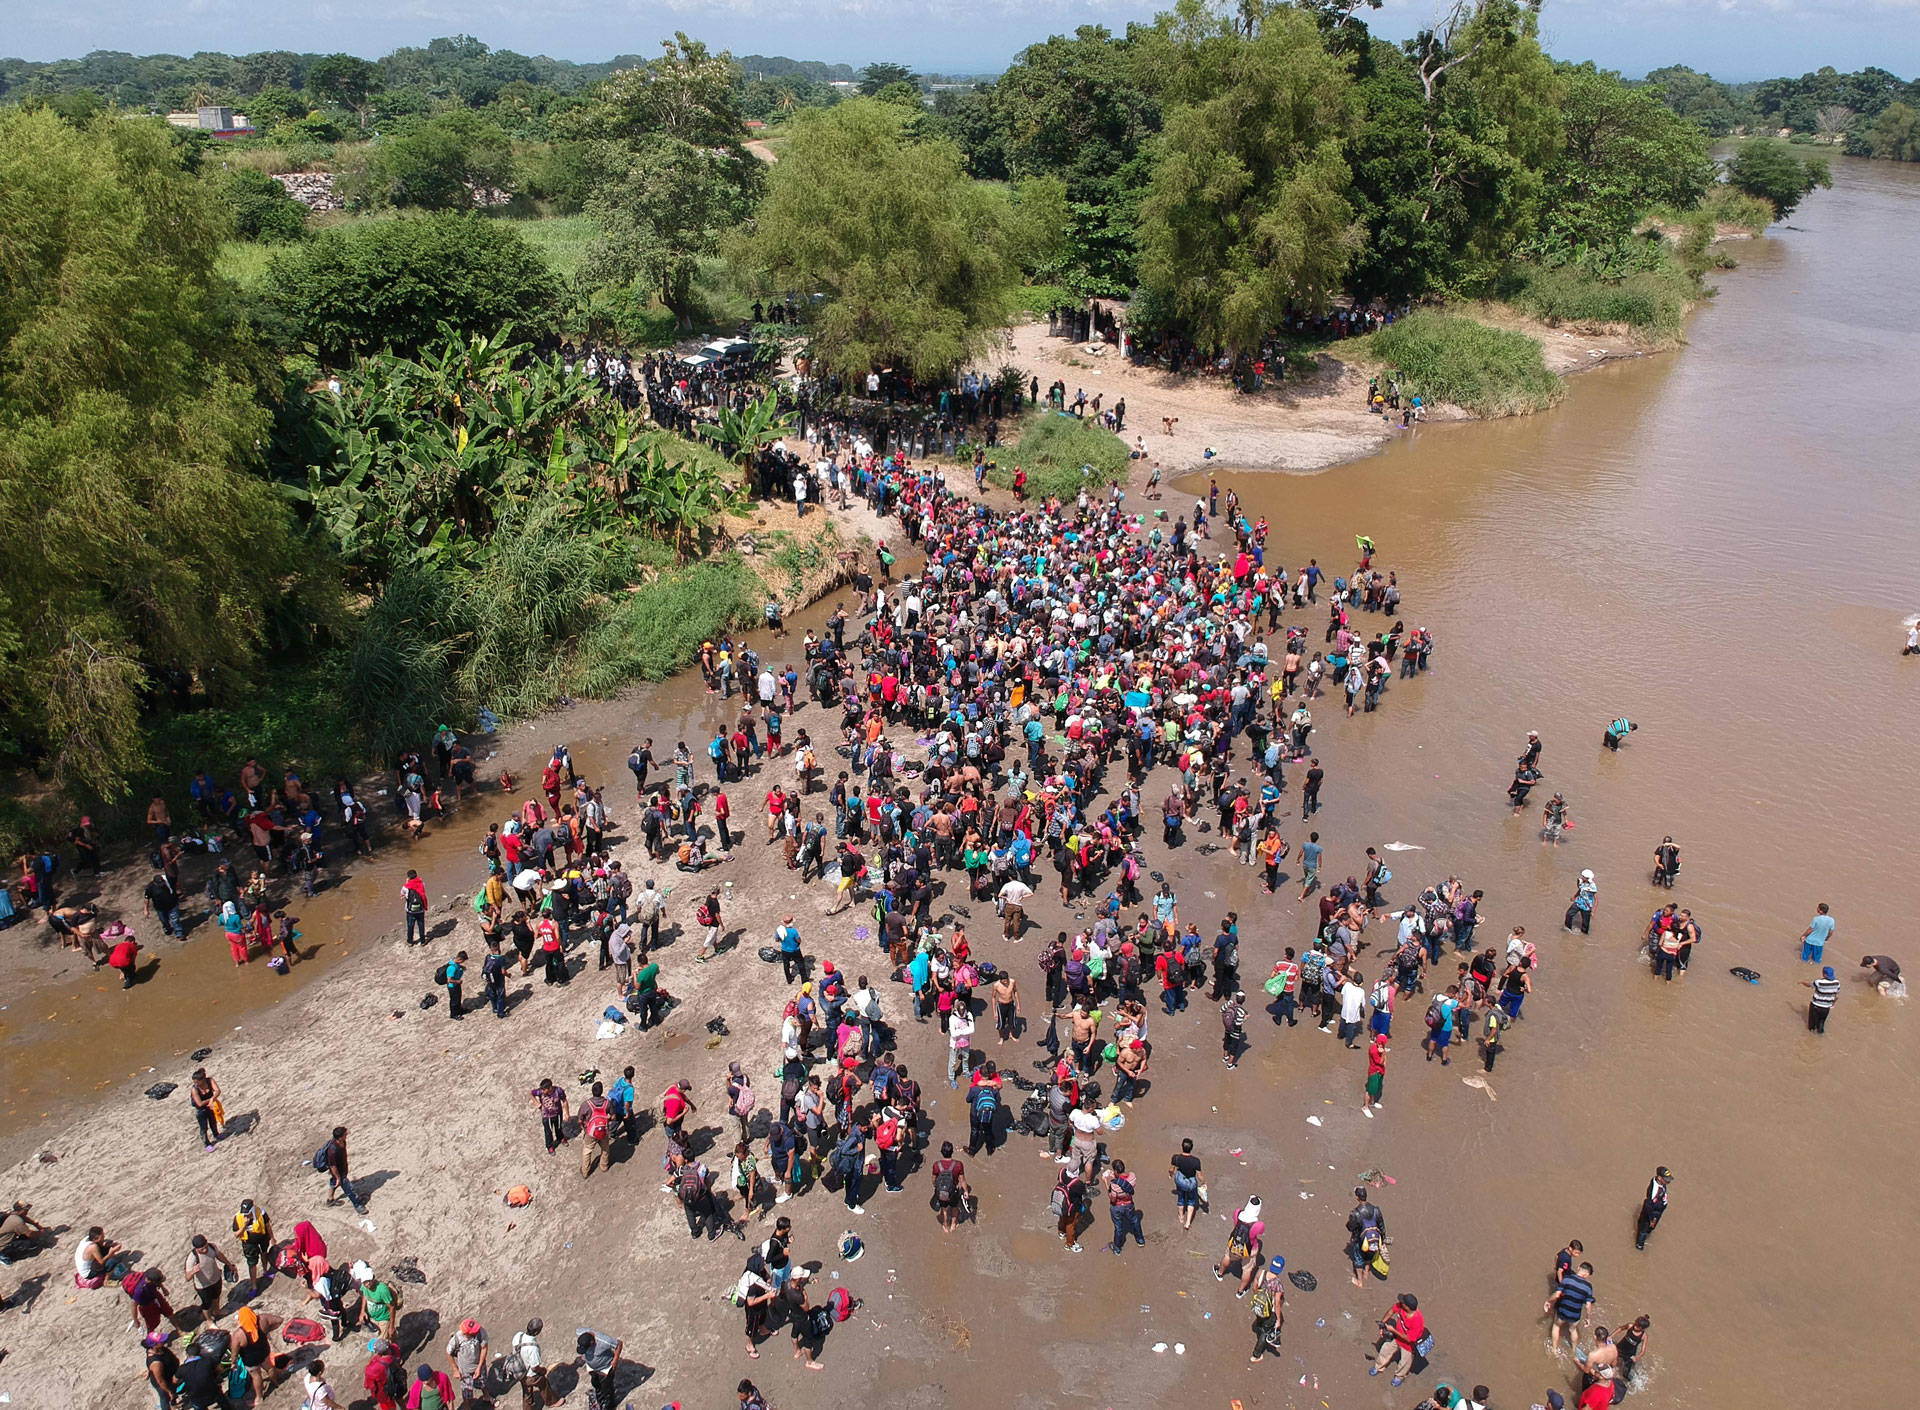 Migrants reach Mexico after crossing the Suchiate River from Tecun Uman in Guatemala to Ciudad Hidalgo in Mexico on Oct. 29, 2018, a day after a security fence on the international bridge was reinforced to prevent them from passing through. CARLOS ALONZO/AFP/Getty Images